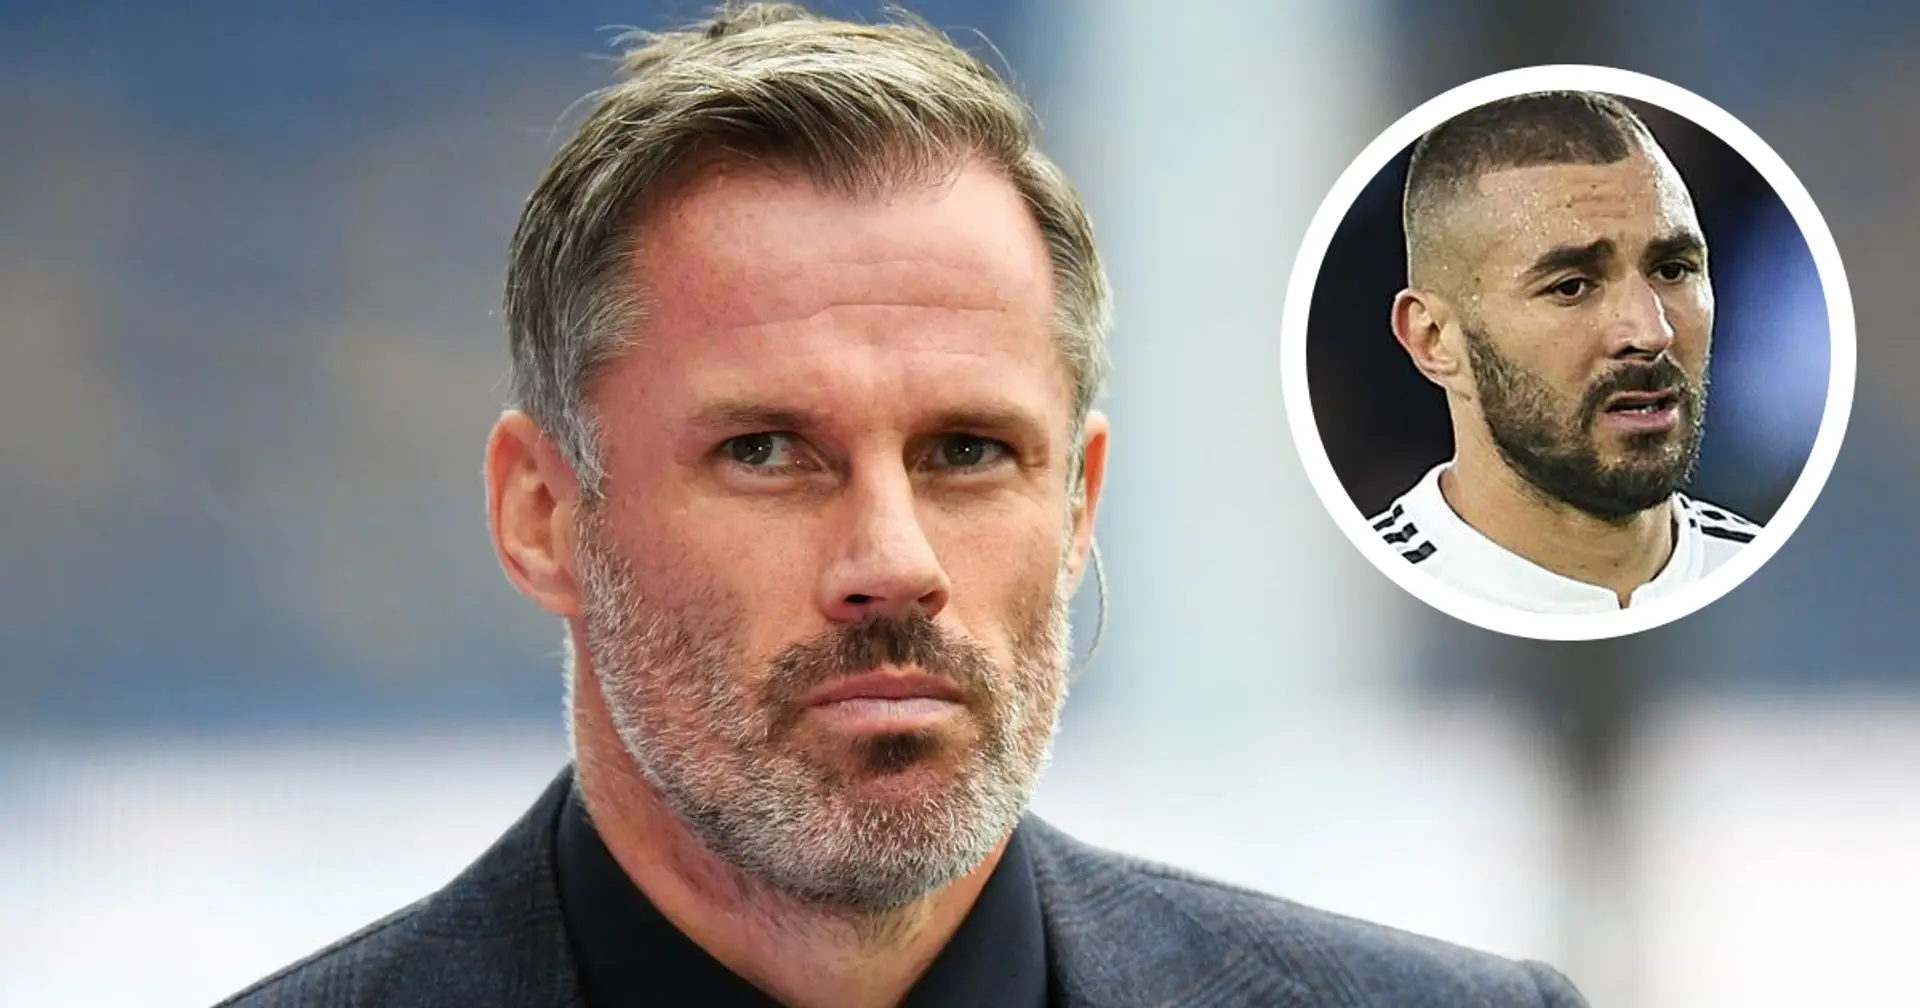 'Not something that doesn't happen - he's just been caught': Jamie Carragher defends Karim Benzema's half-time comments about Vinicius Jr 